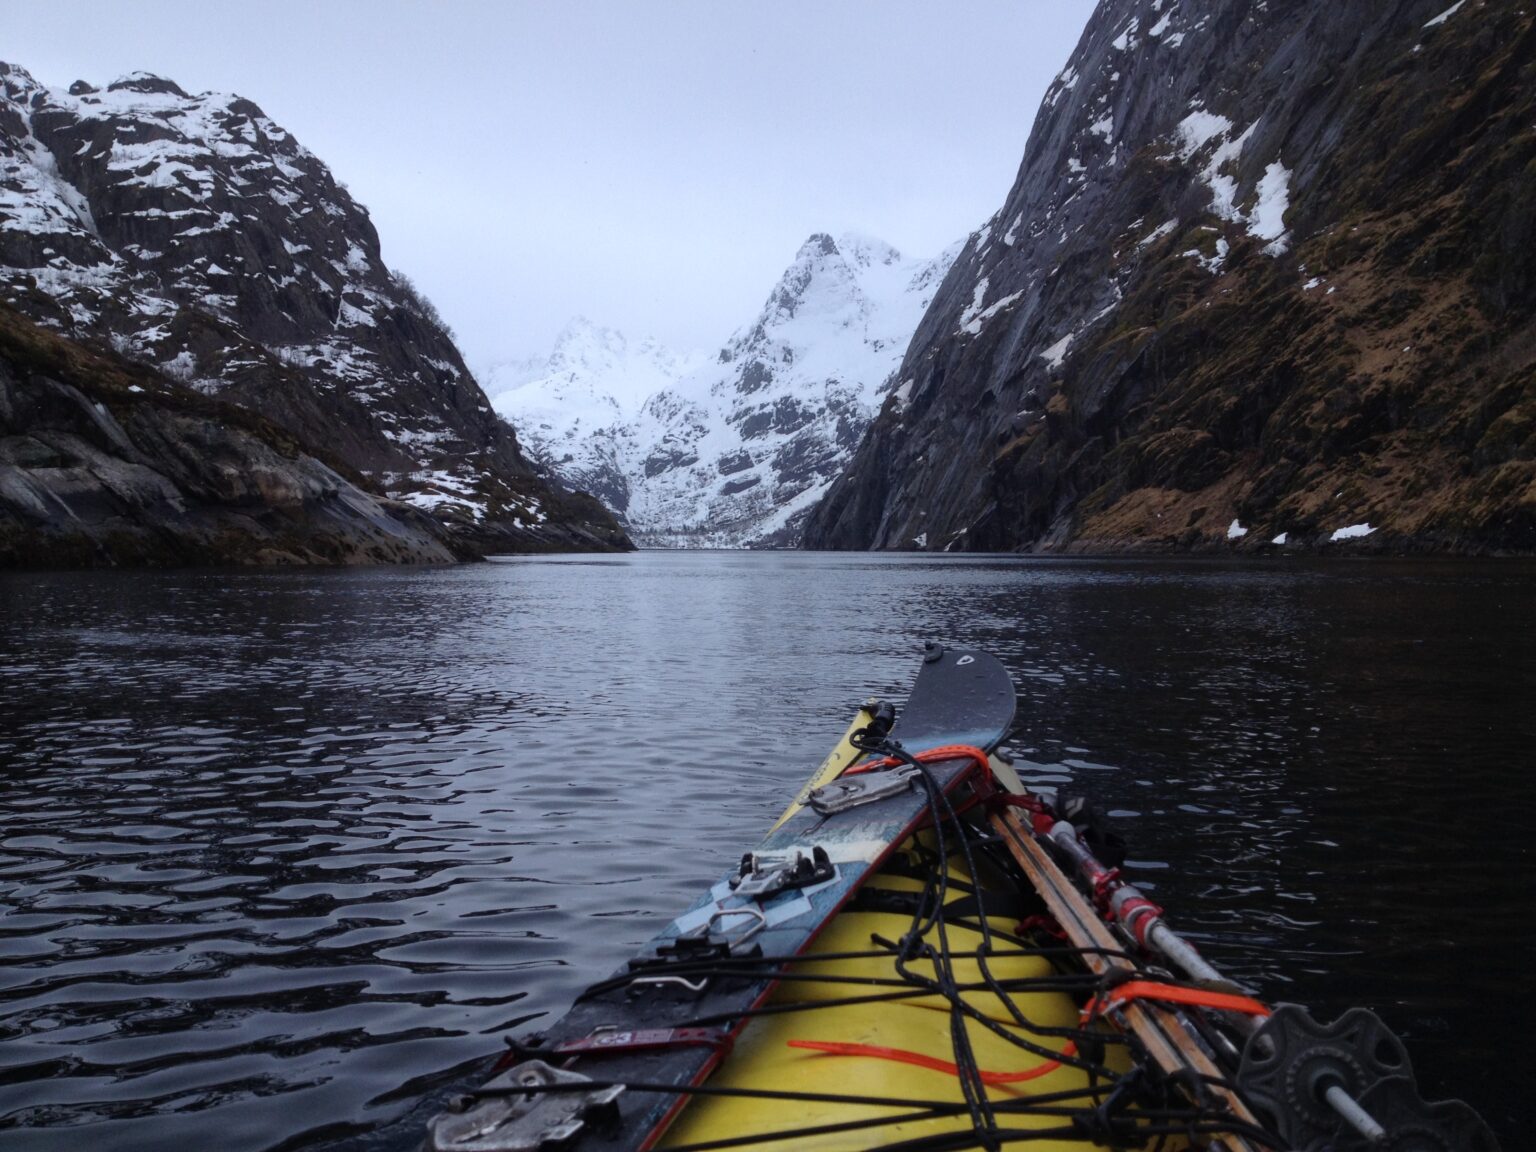 Kayaking into the Trollfjord with a snowboard in the Lofoten Islands of Norway